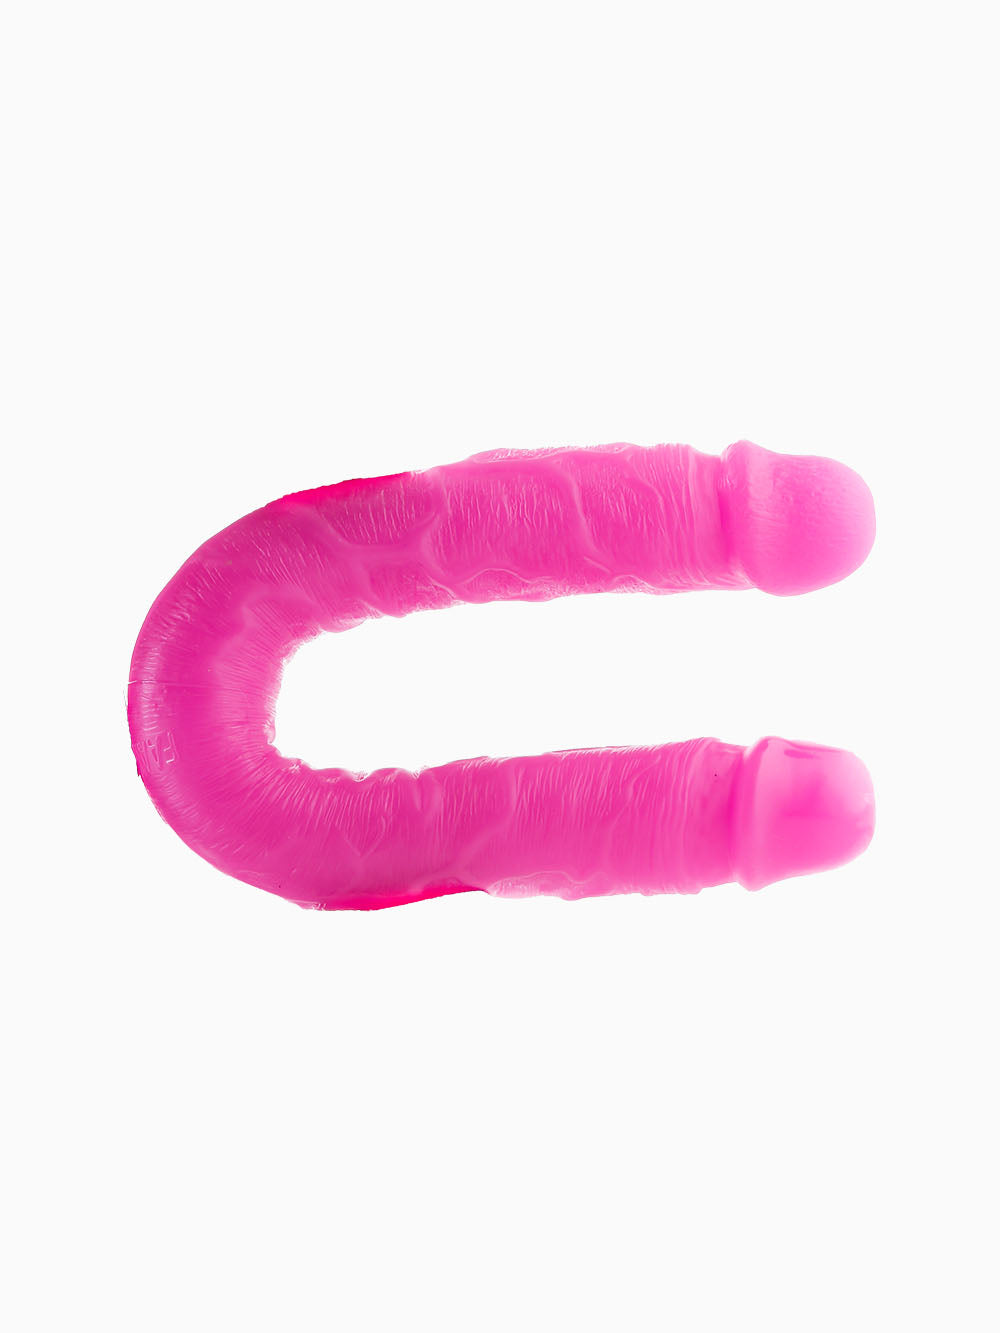 Pillow Talk Ultimate Dildo, 18 Inches, Pink